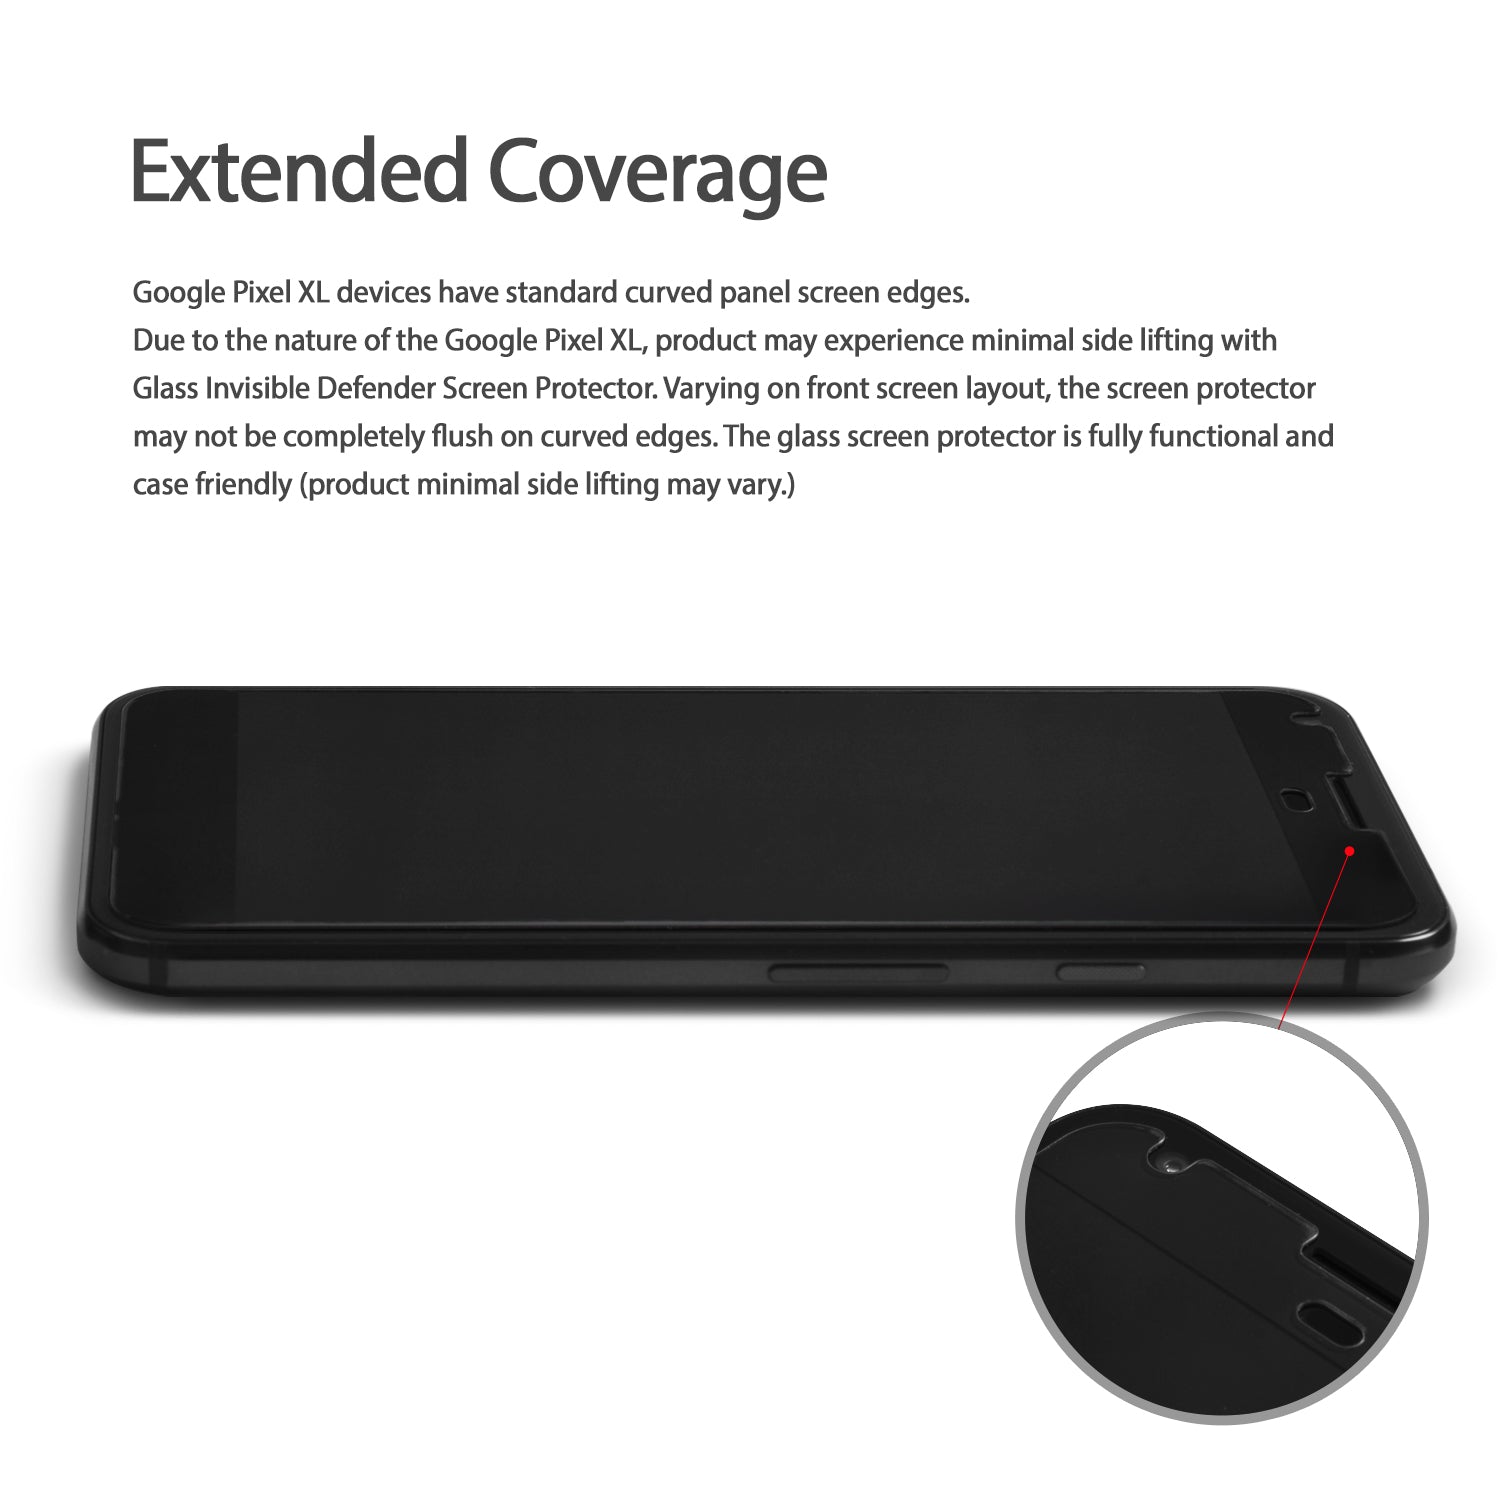 Google Pixel XL Screen Protector | Invisible Defender Glass - Extended Coverage